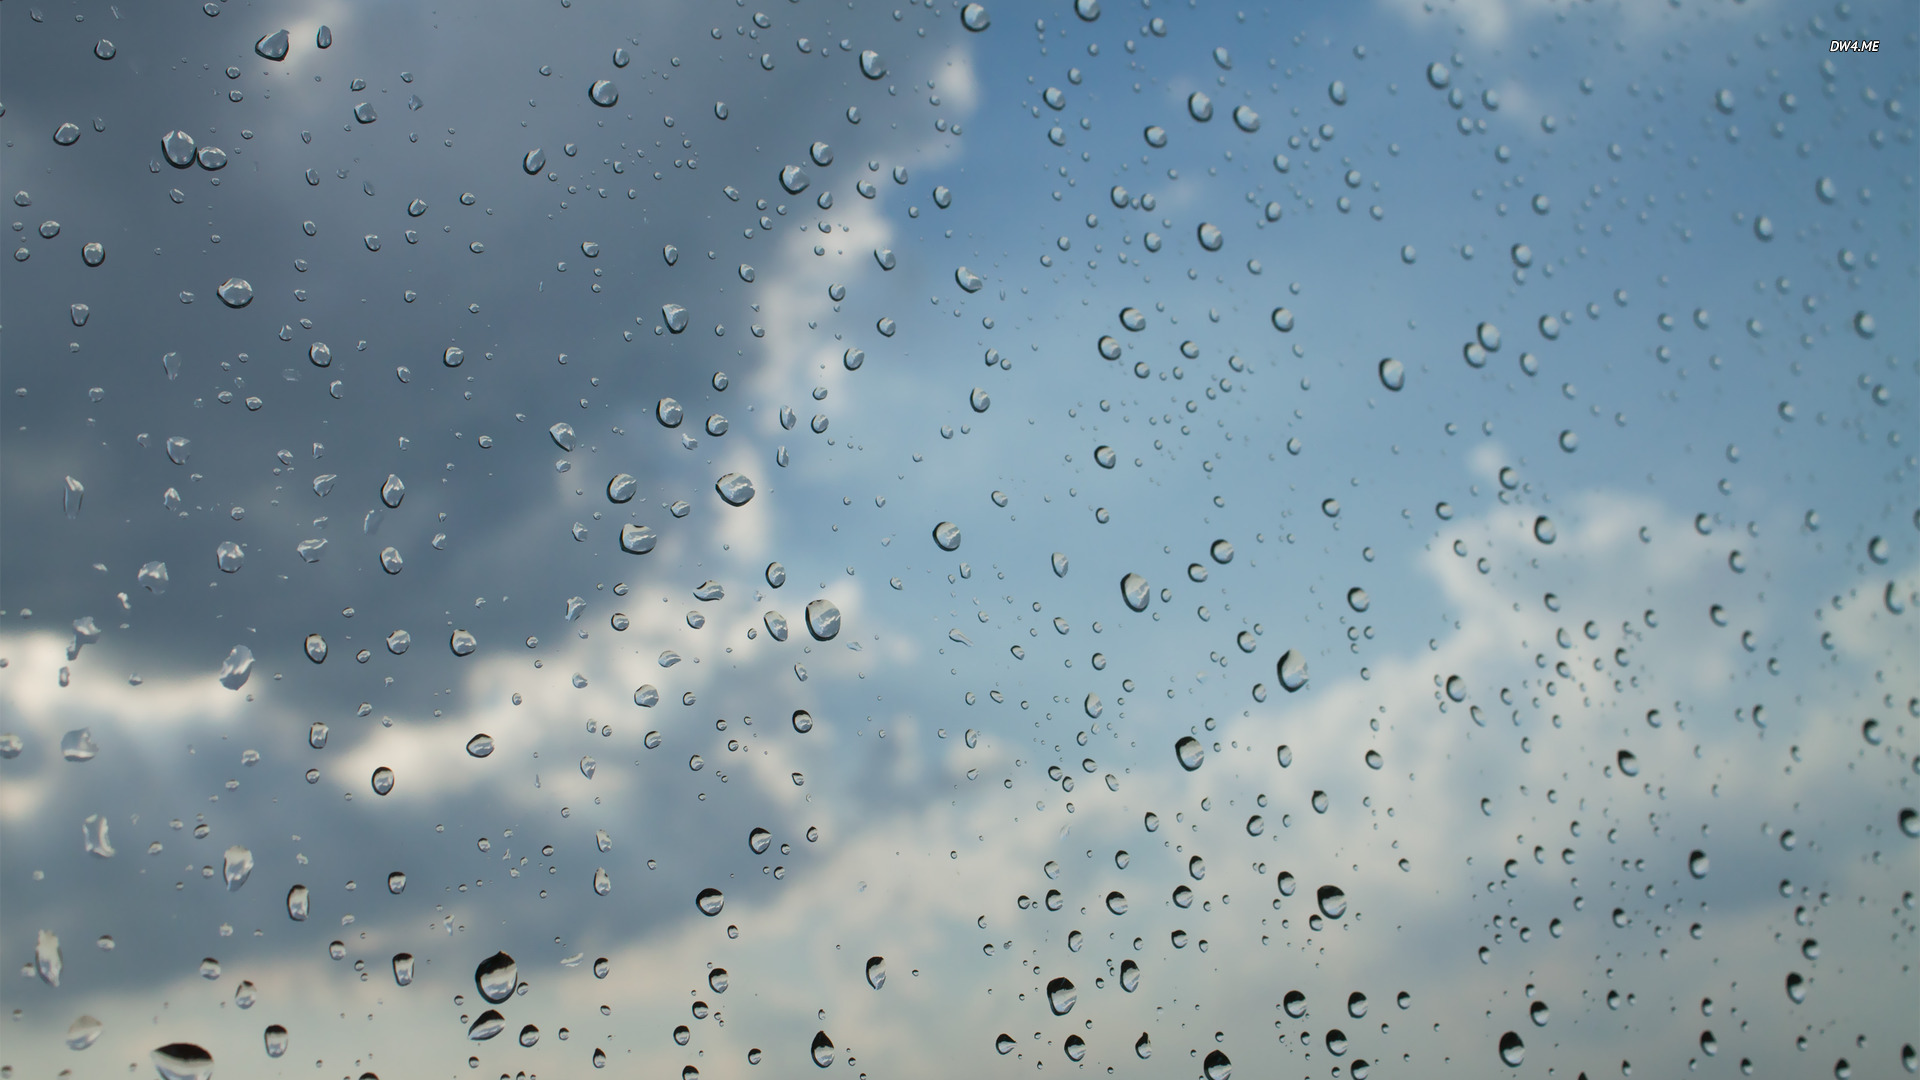 Raindrops and clouds wallpaper   Photography wallpapers   584